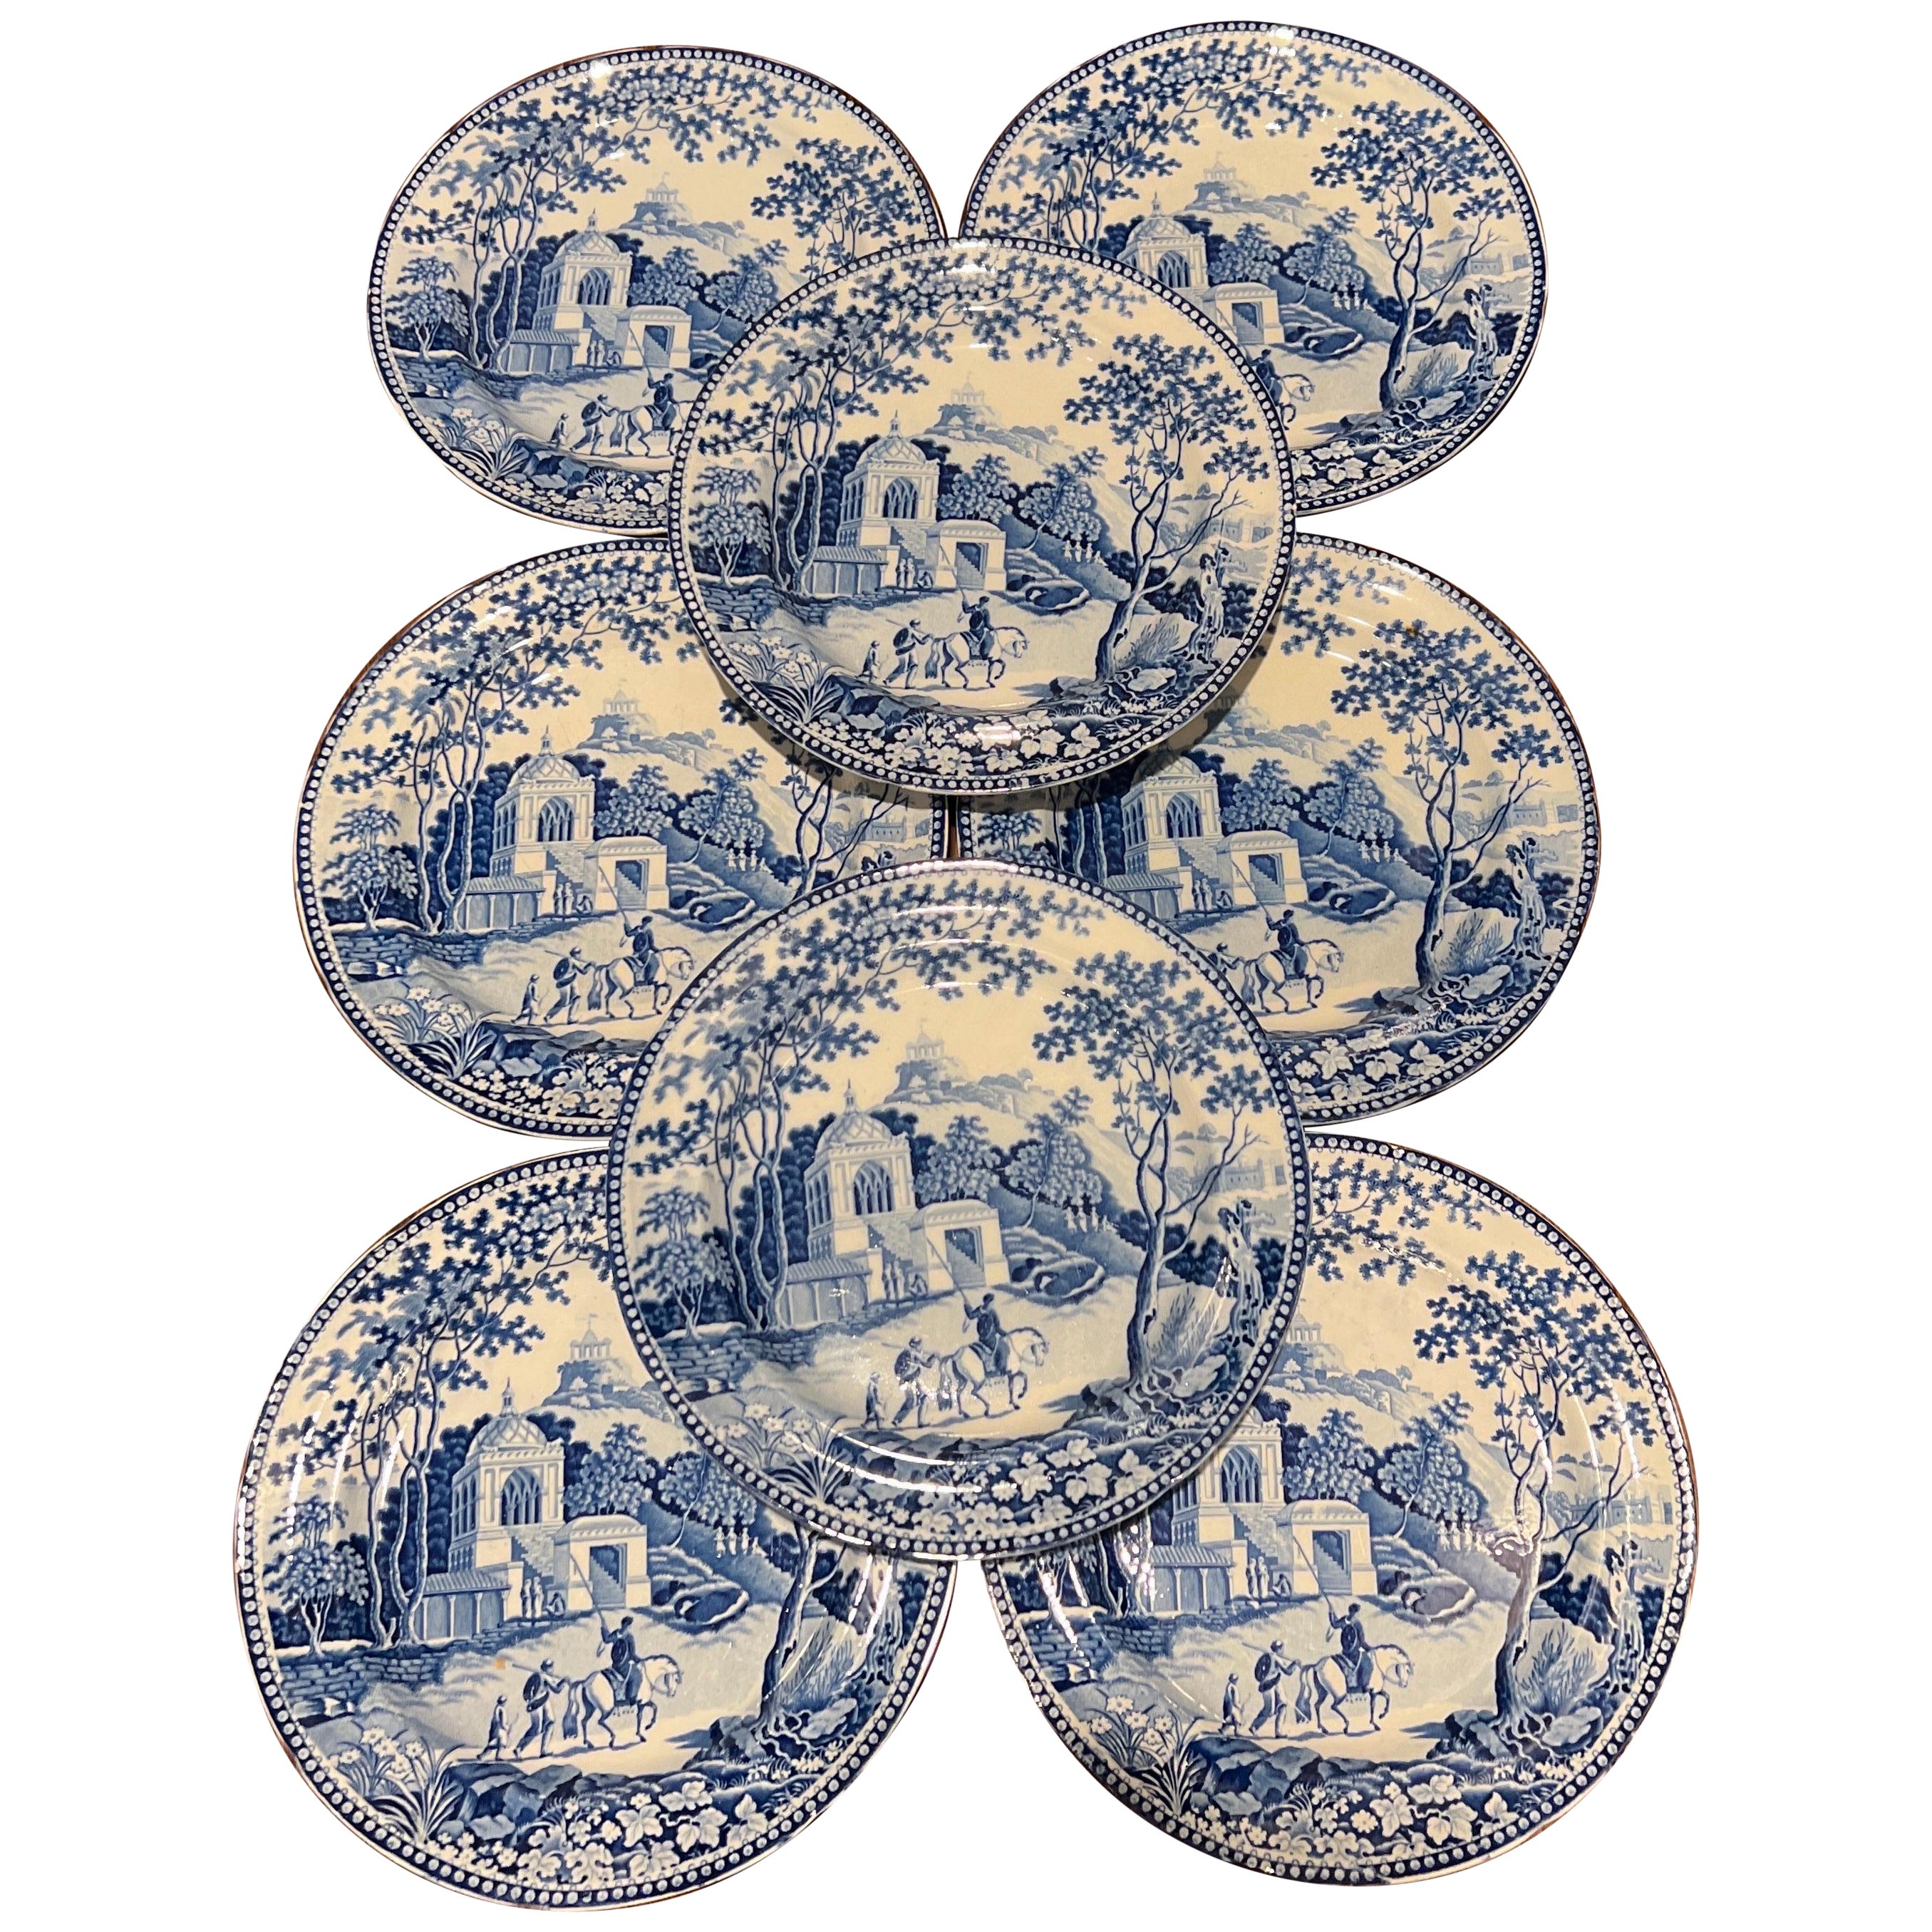 Set of 8, John Rogers Staffordshire "Musketeers" Pattern Dinner Plates C. 1820